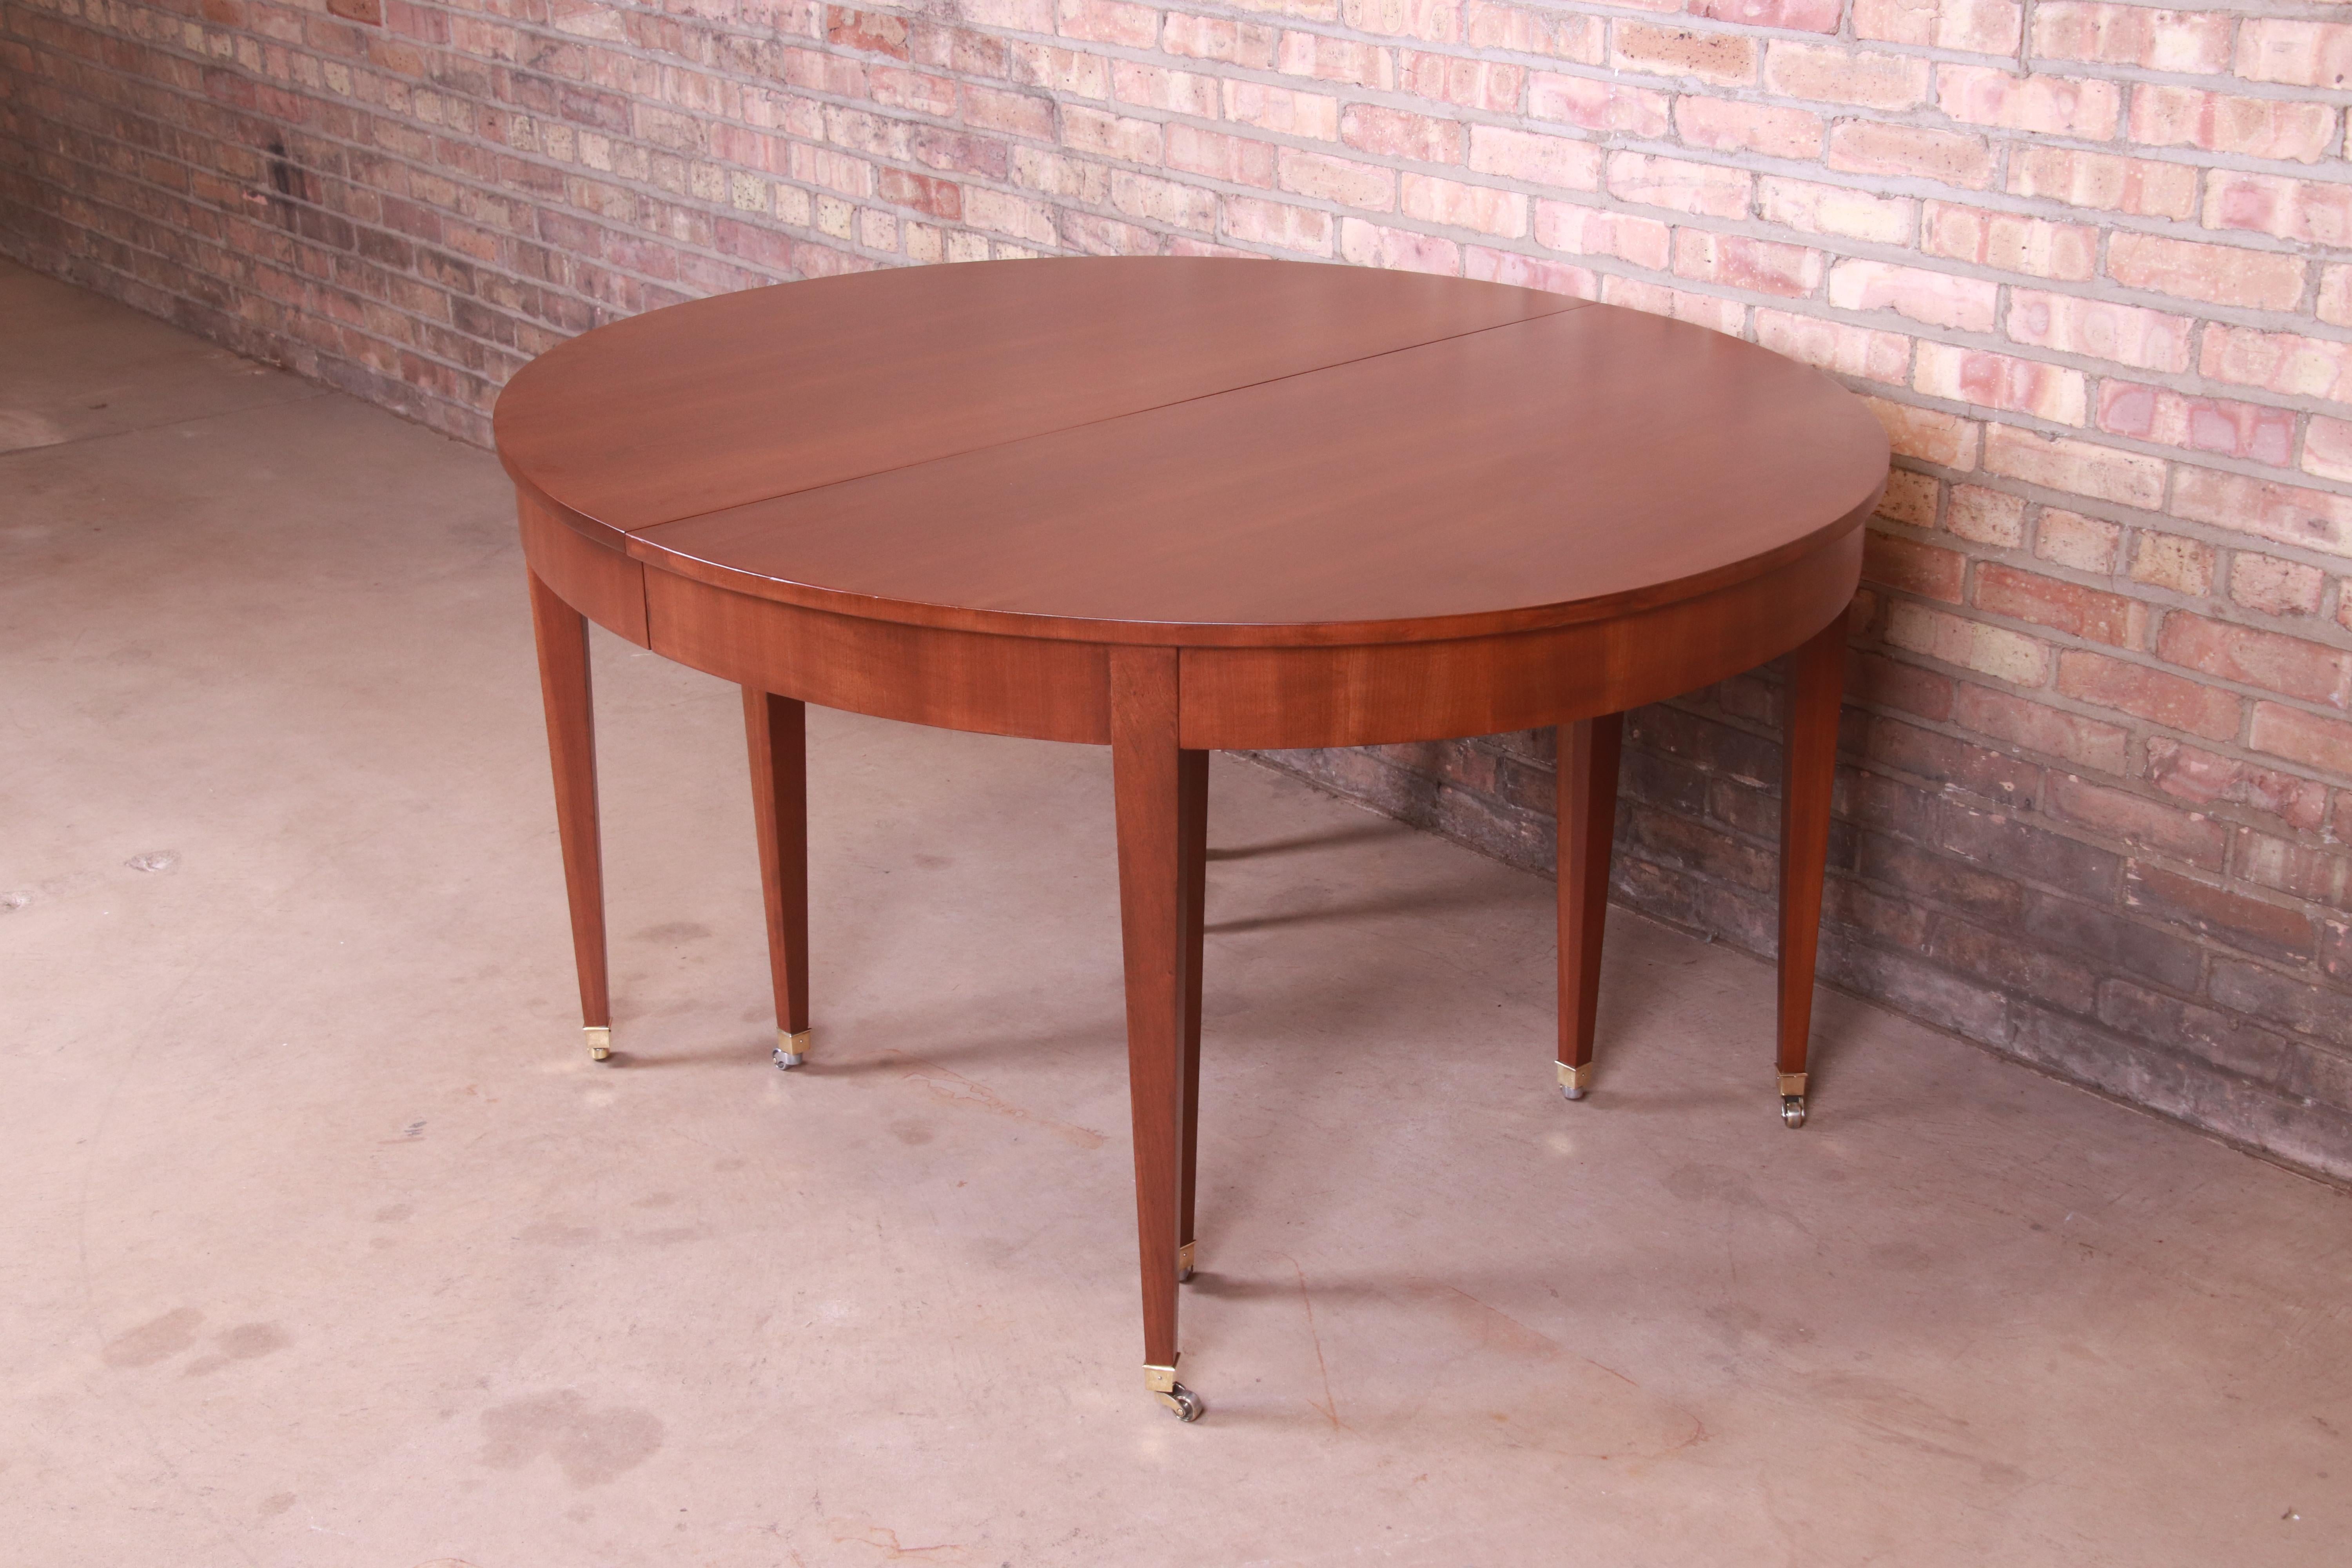 20th Century Baker Furniture French Regency Cherry Wood Dining Table, Newly Refinished